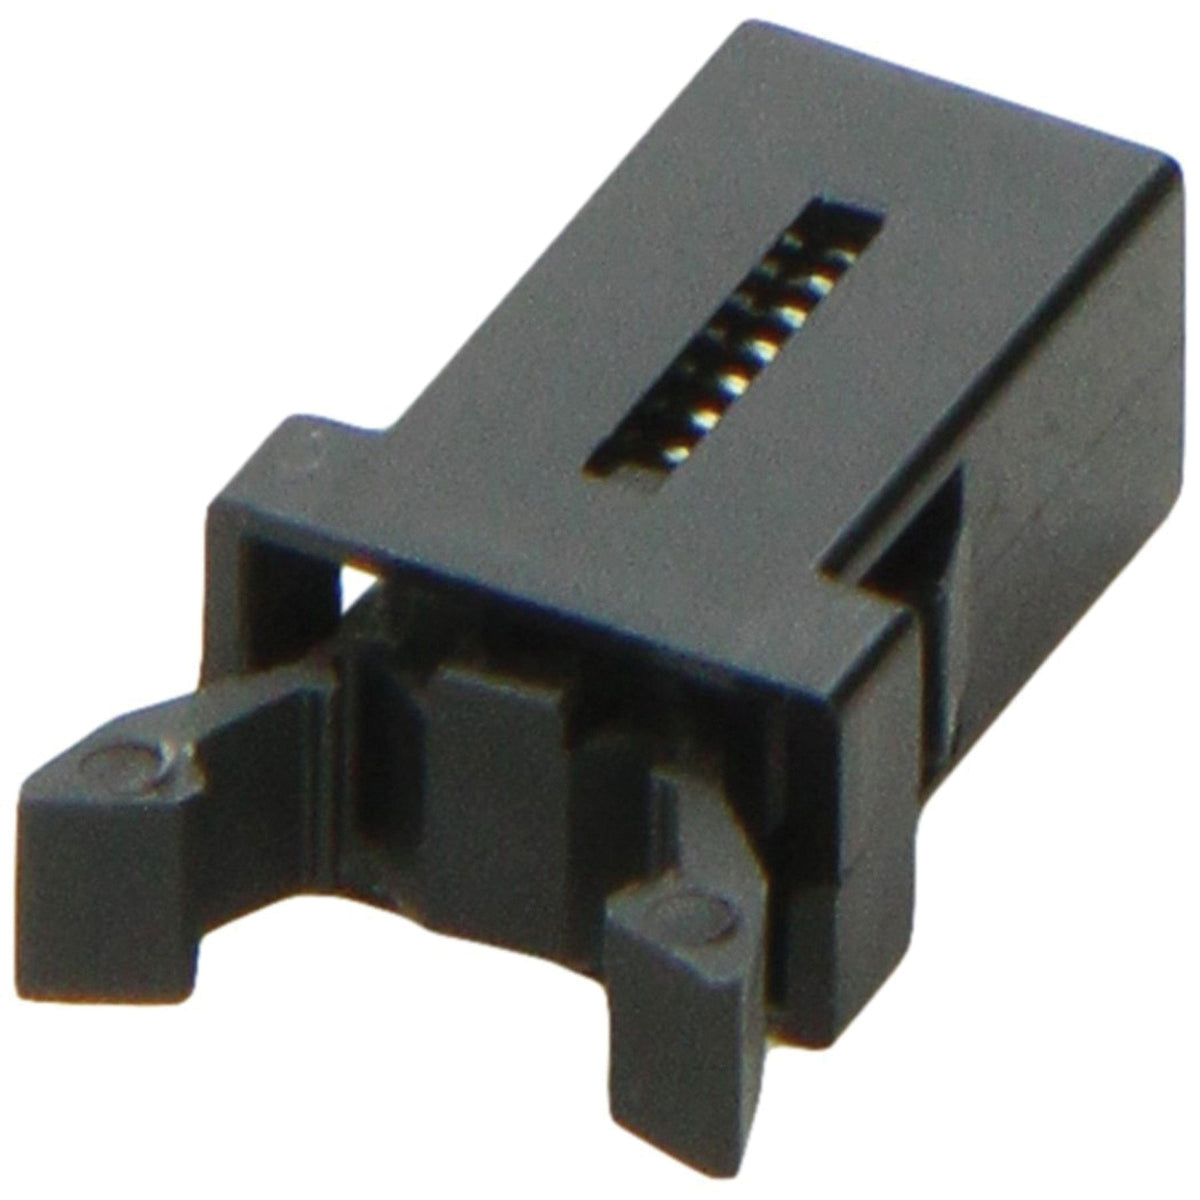 WFCO Qualifies for Free Shipping WFCO Push-In Door Latch #WF87/8900-DL